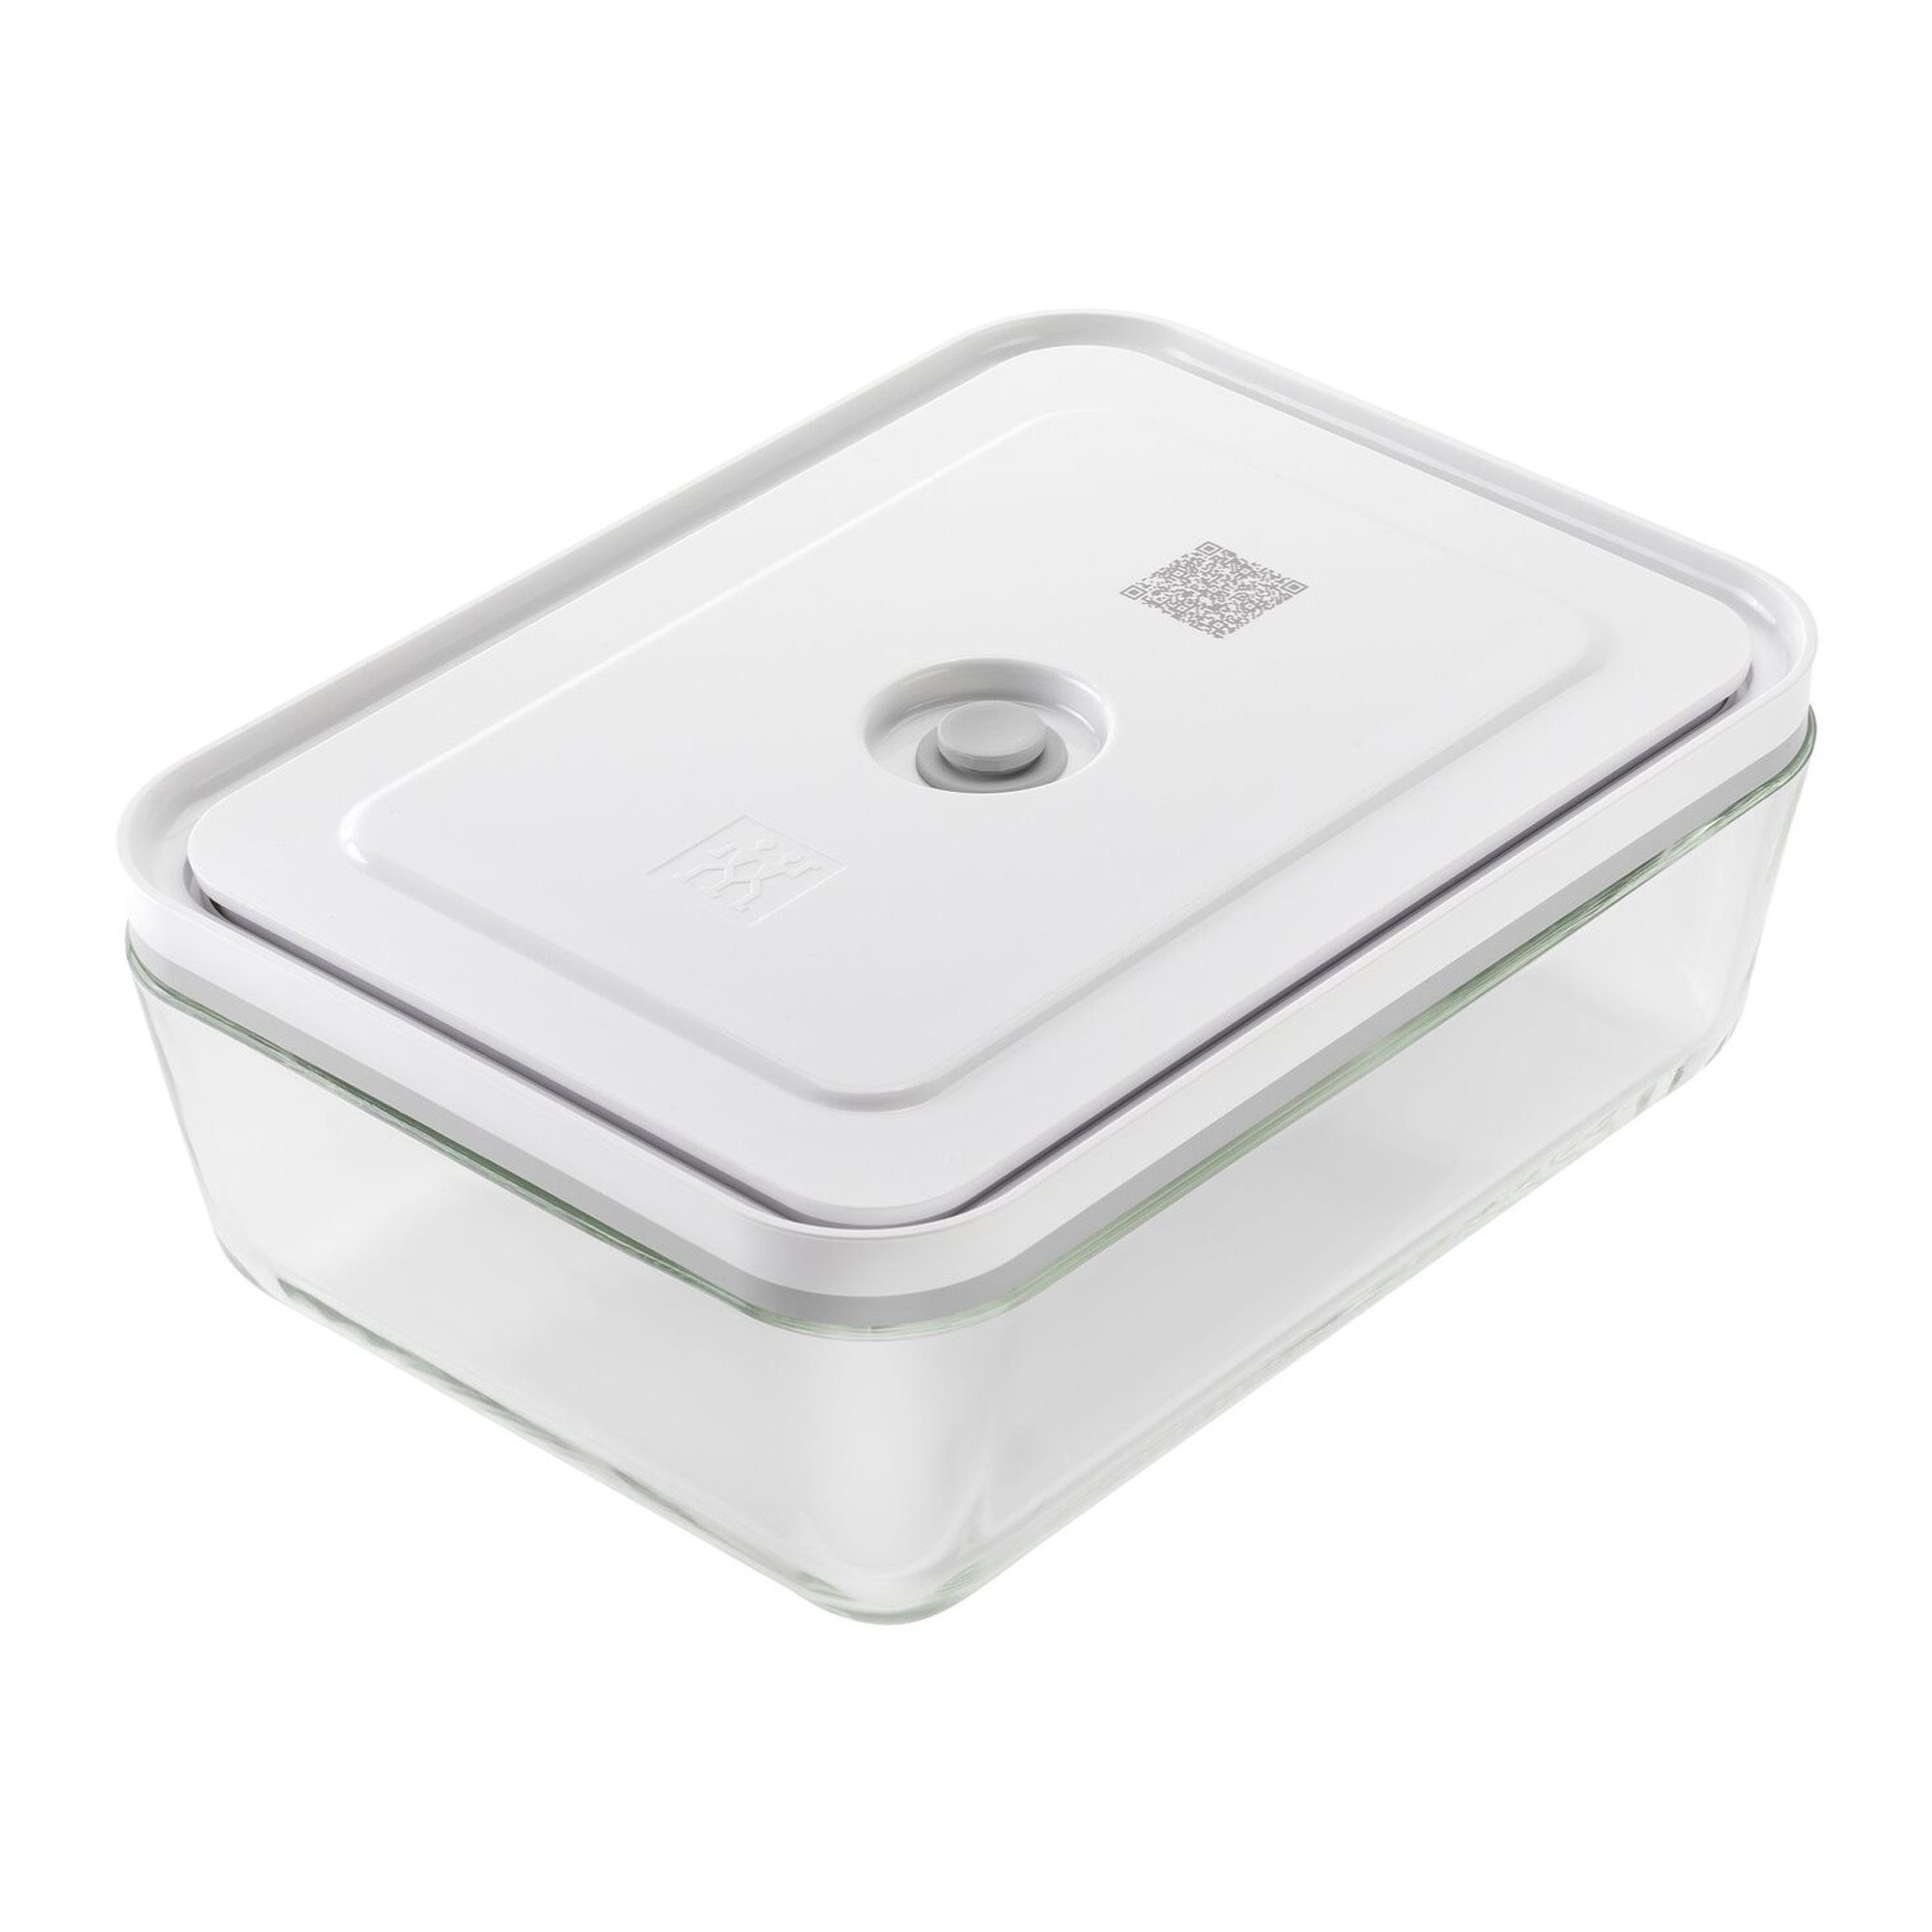 Zwilling Fresh & Save Small Glass Vacuum Container